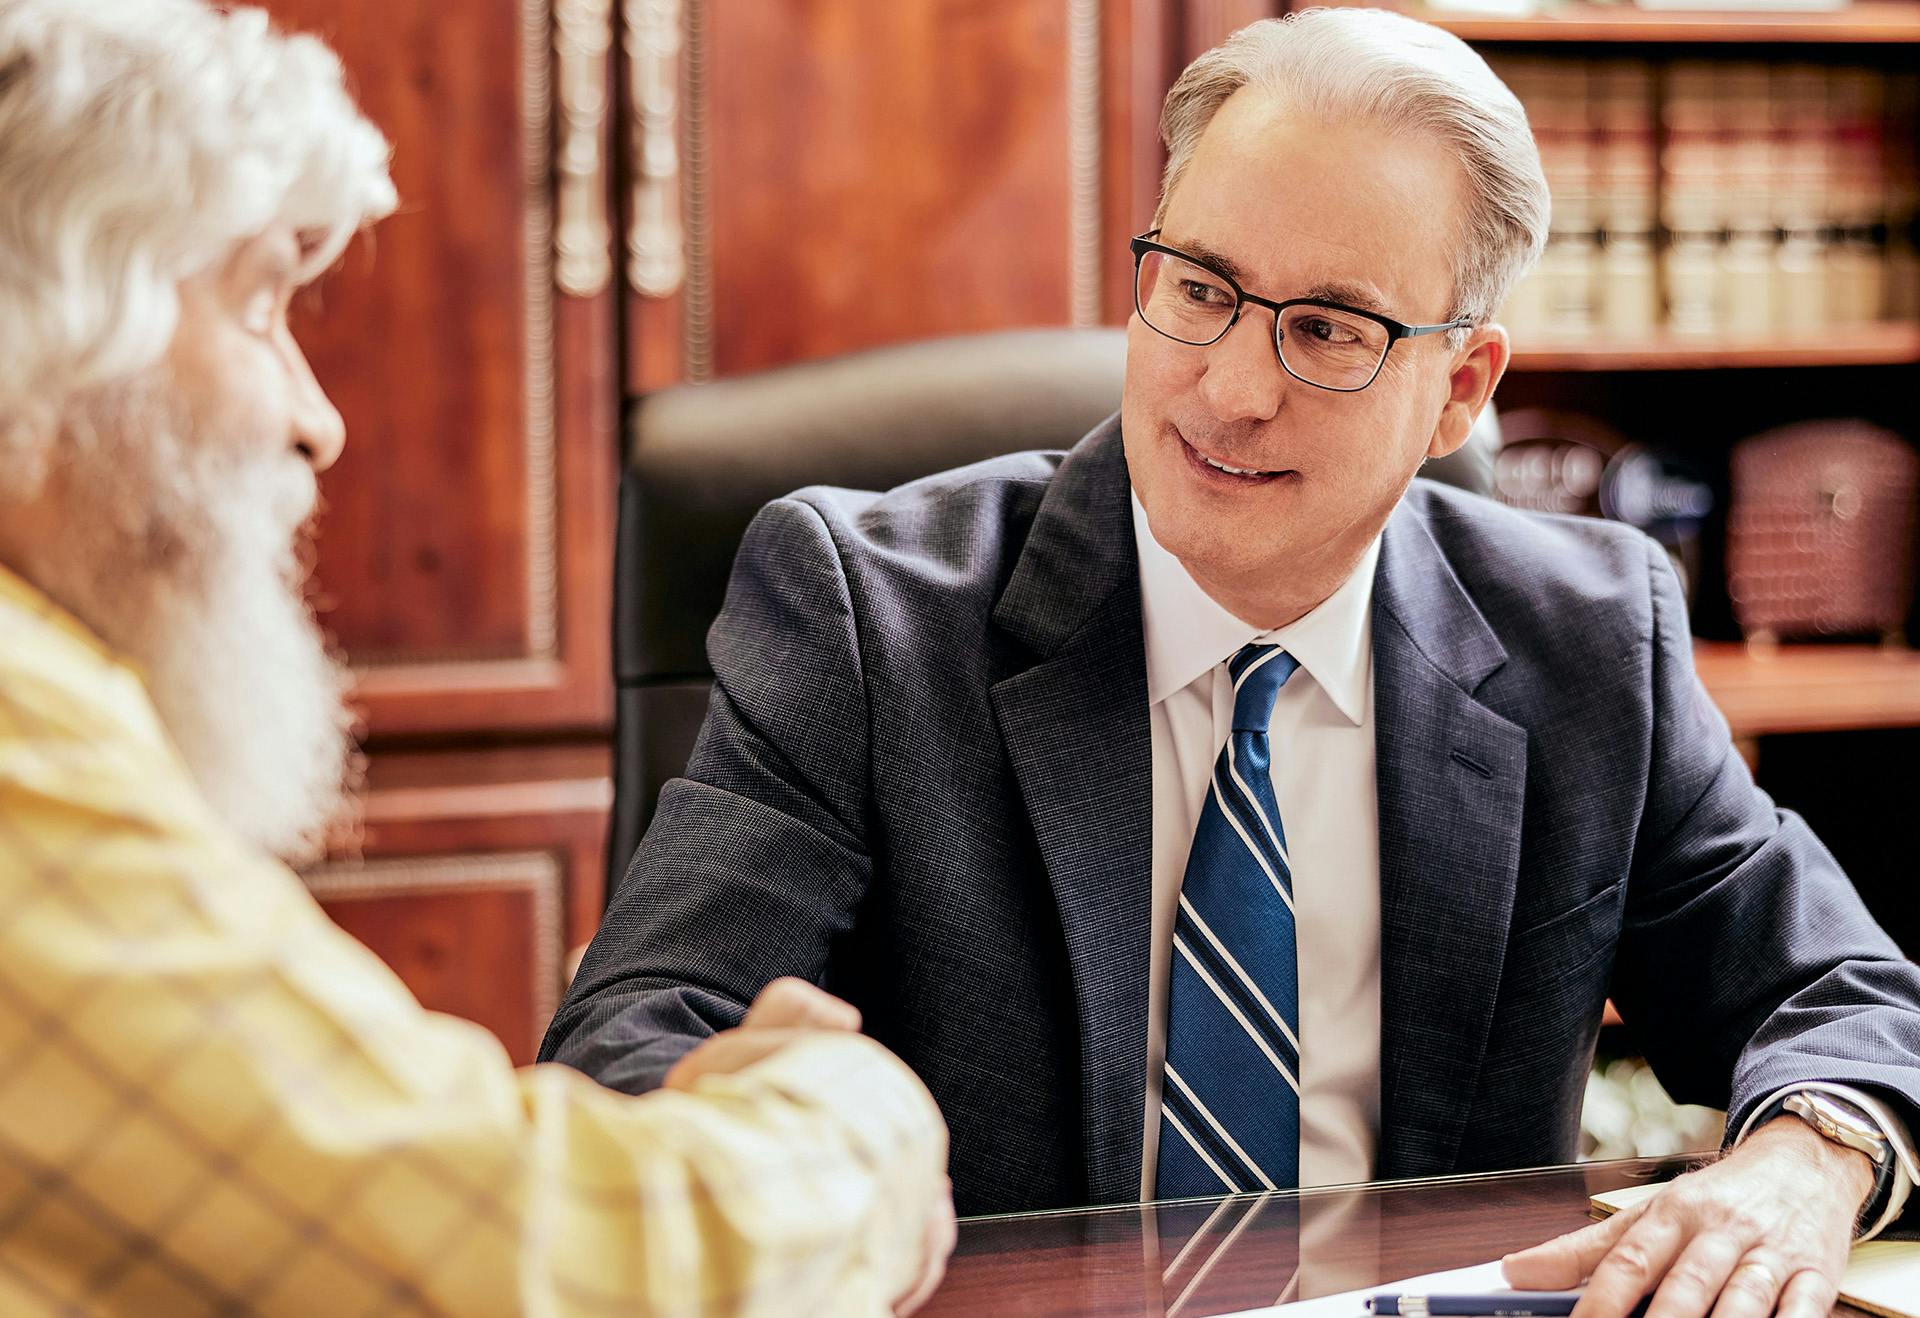 Attorney Belote consulting with a client.